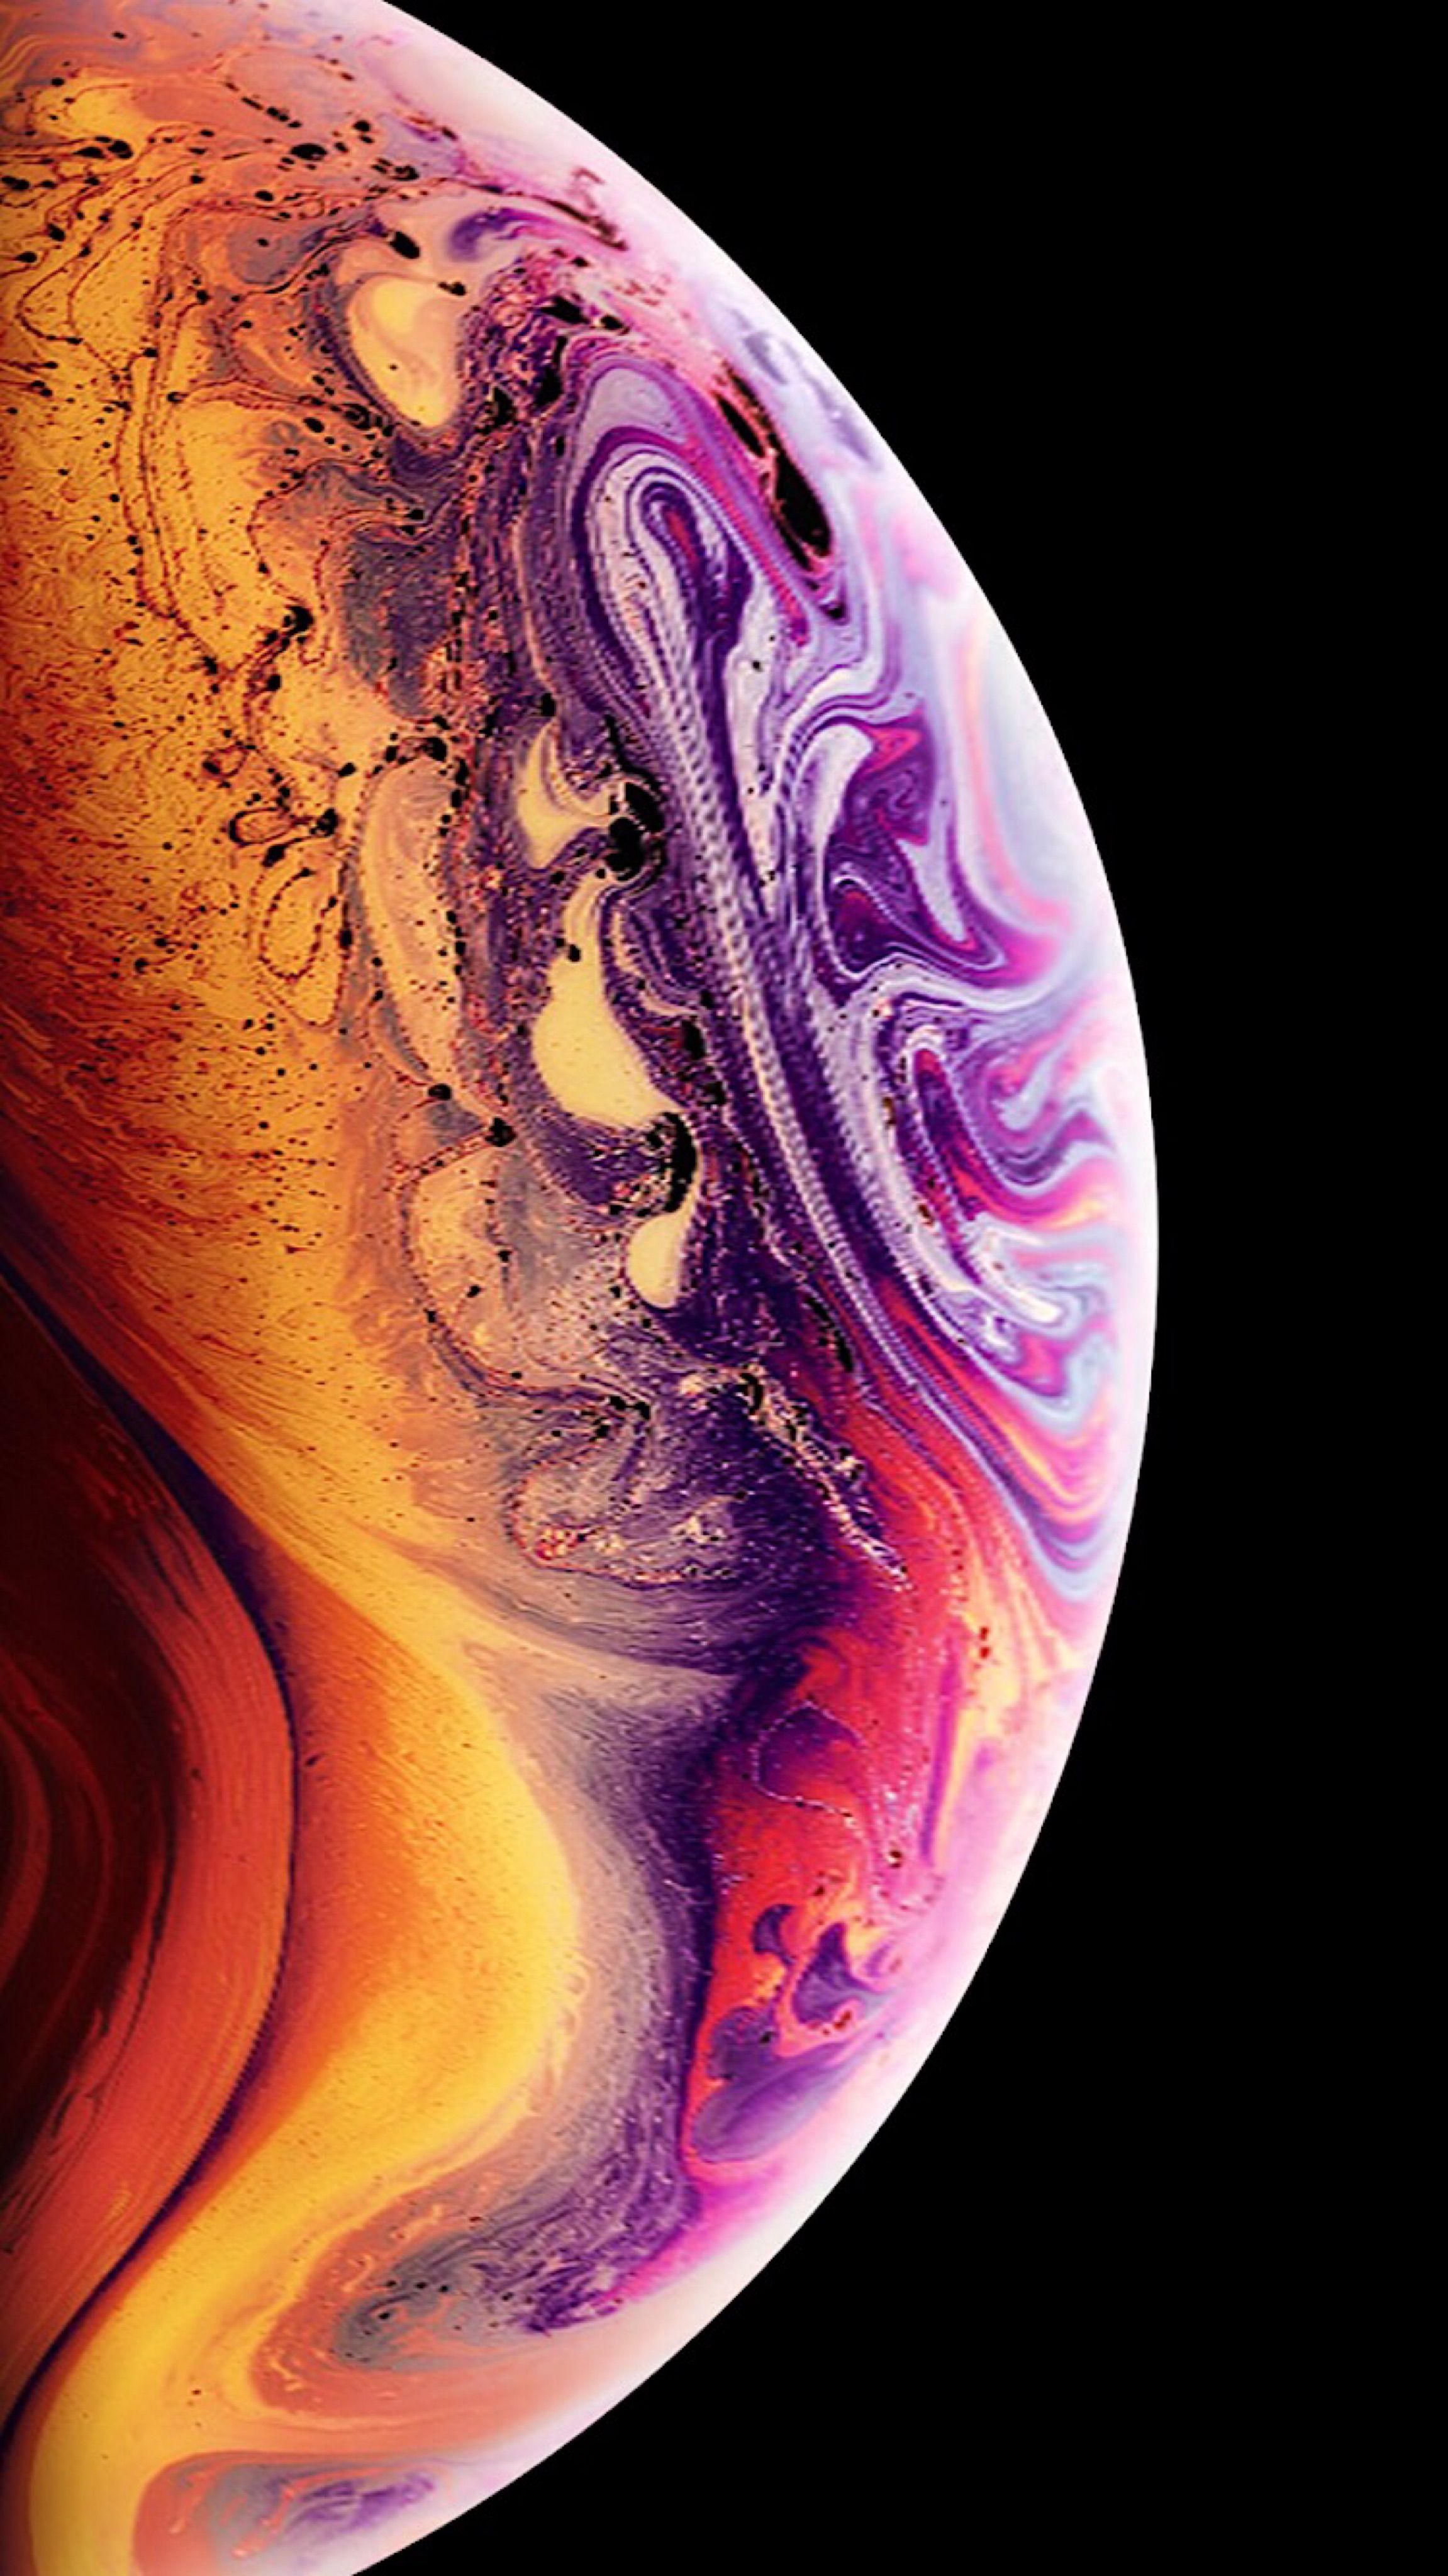 Iphone Xs And Xs Max Wallpapers In High Quality For - Iphone Xs Max Wallpaper Hd - HD Wallpaper 